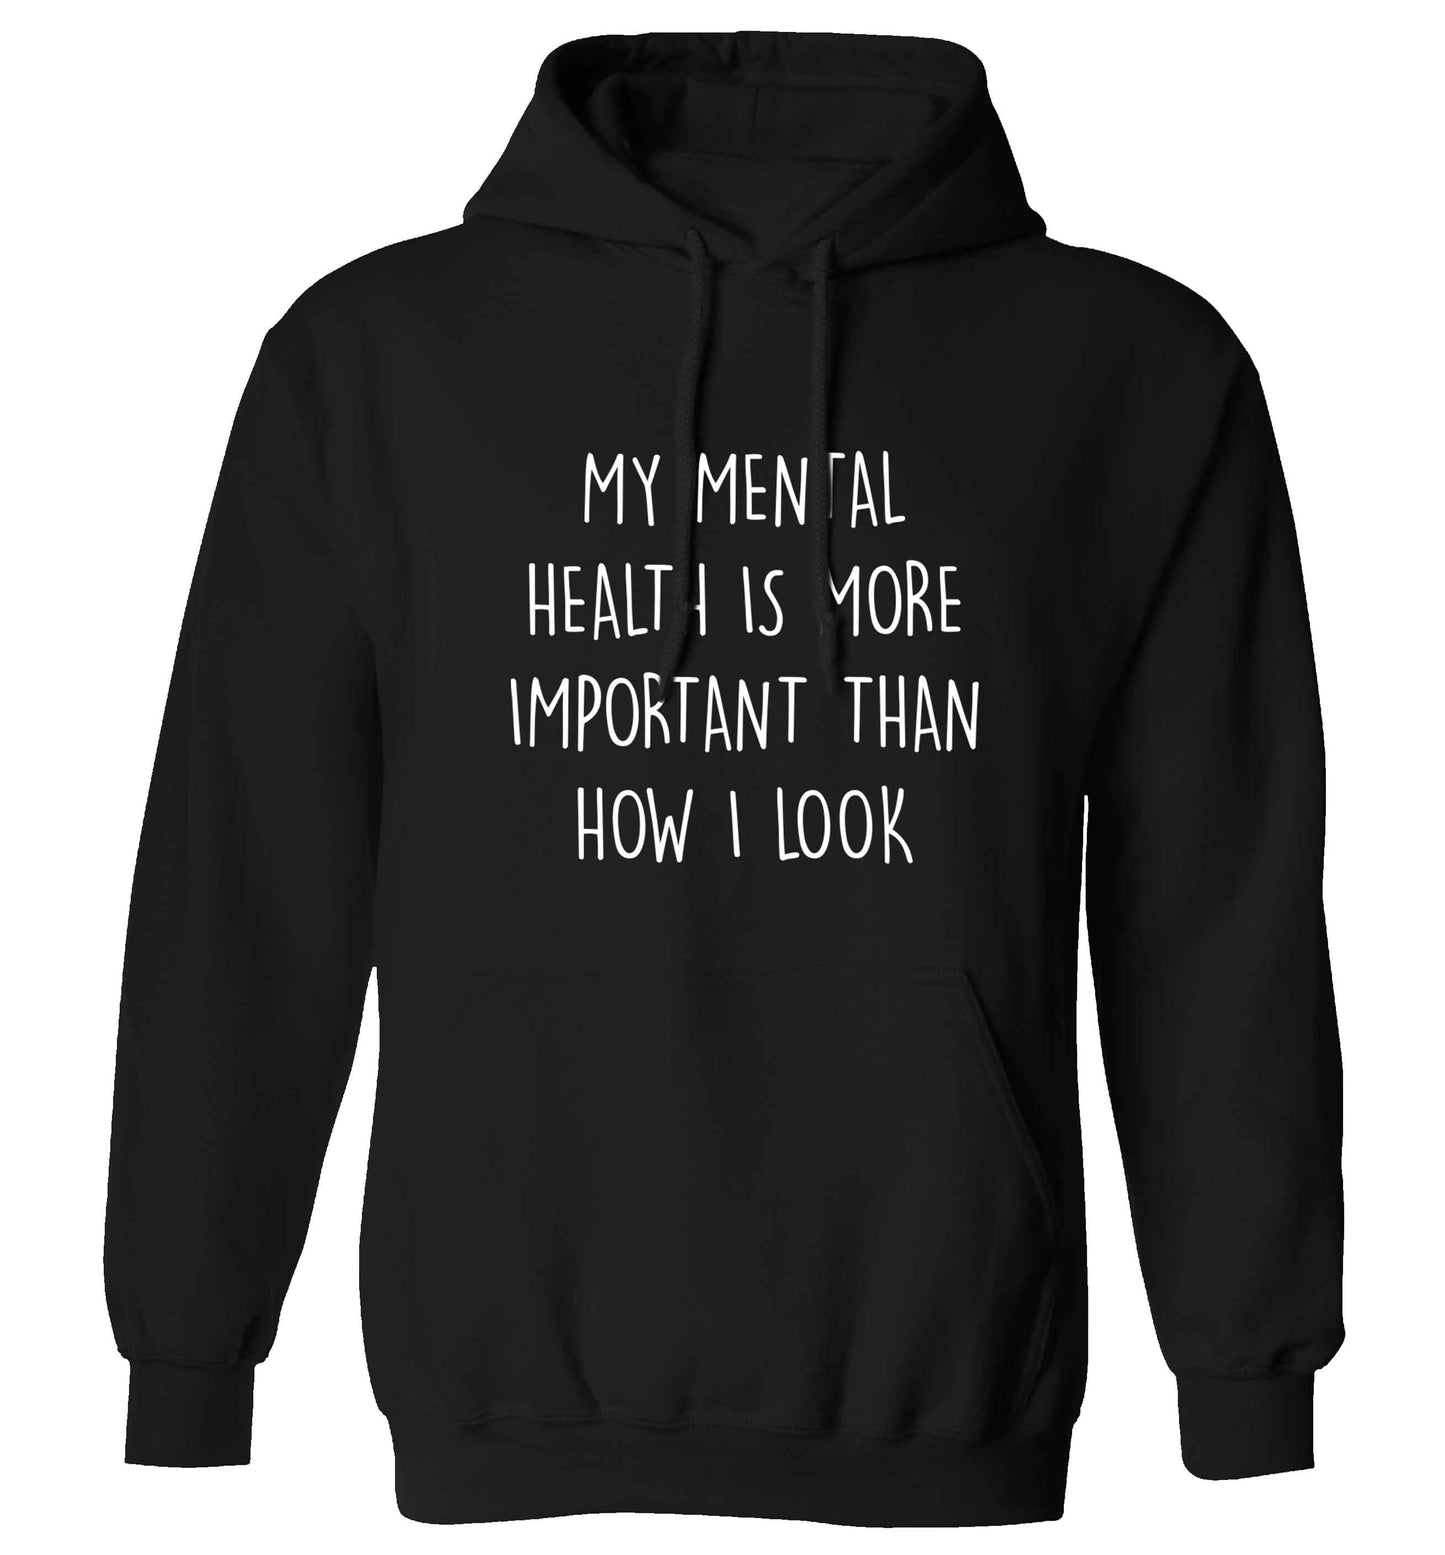 My mental health is more importnat than how I look adults unisex black hoodie 2XL